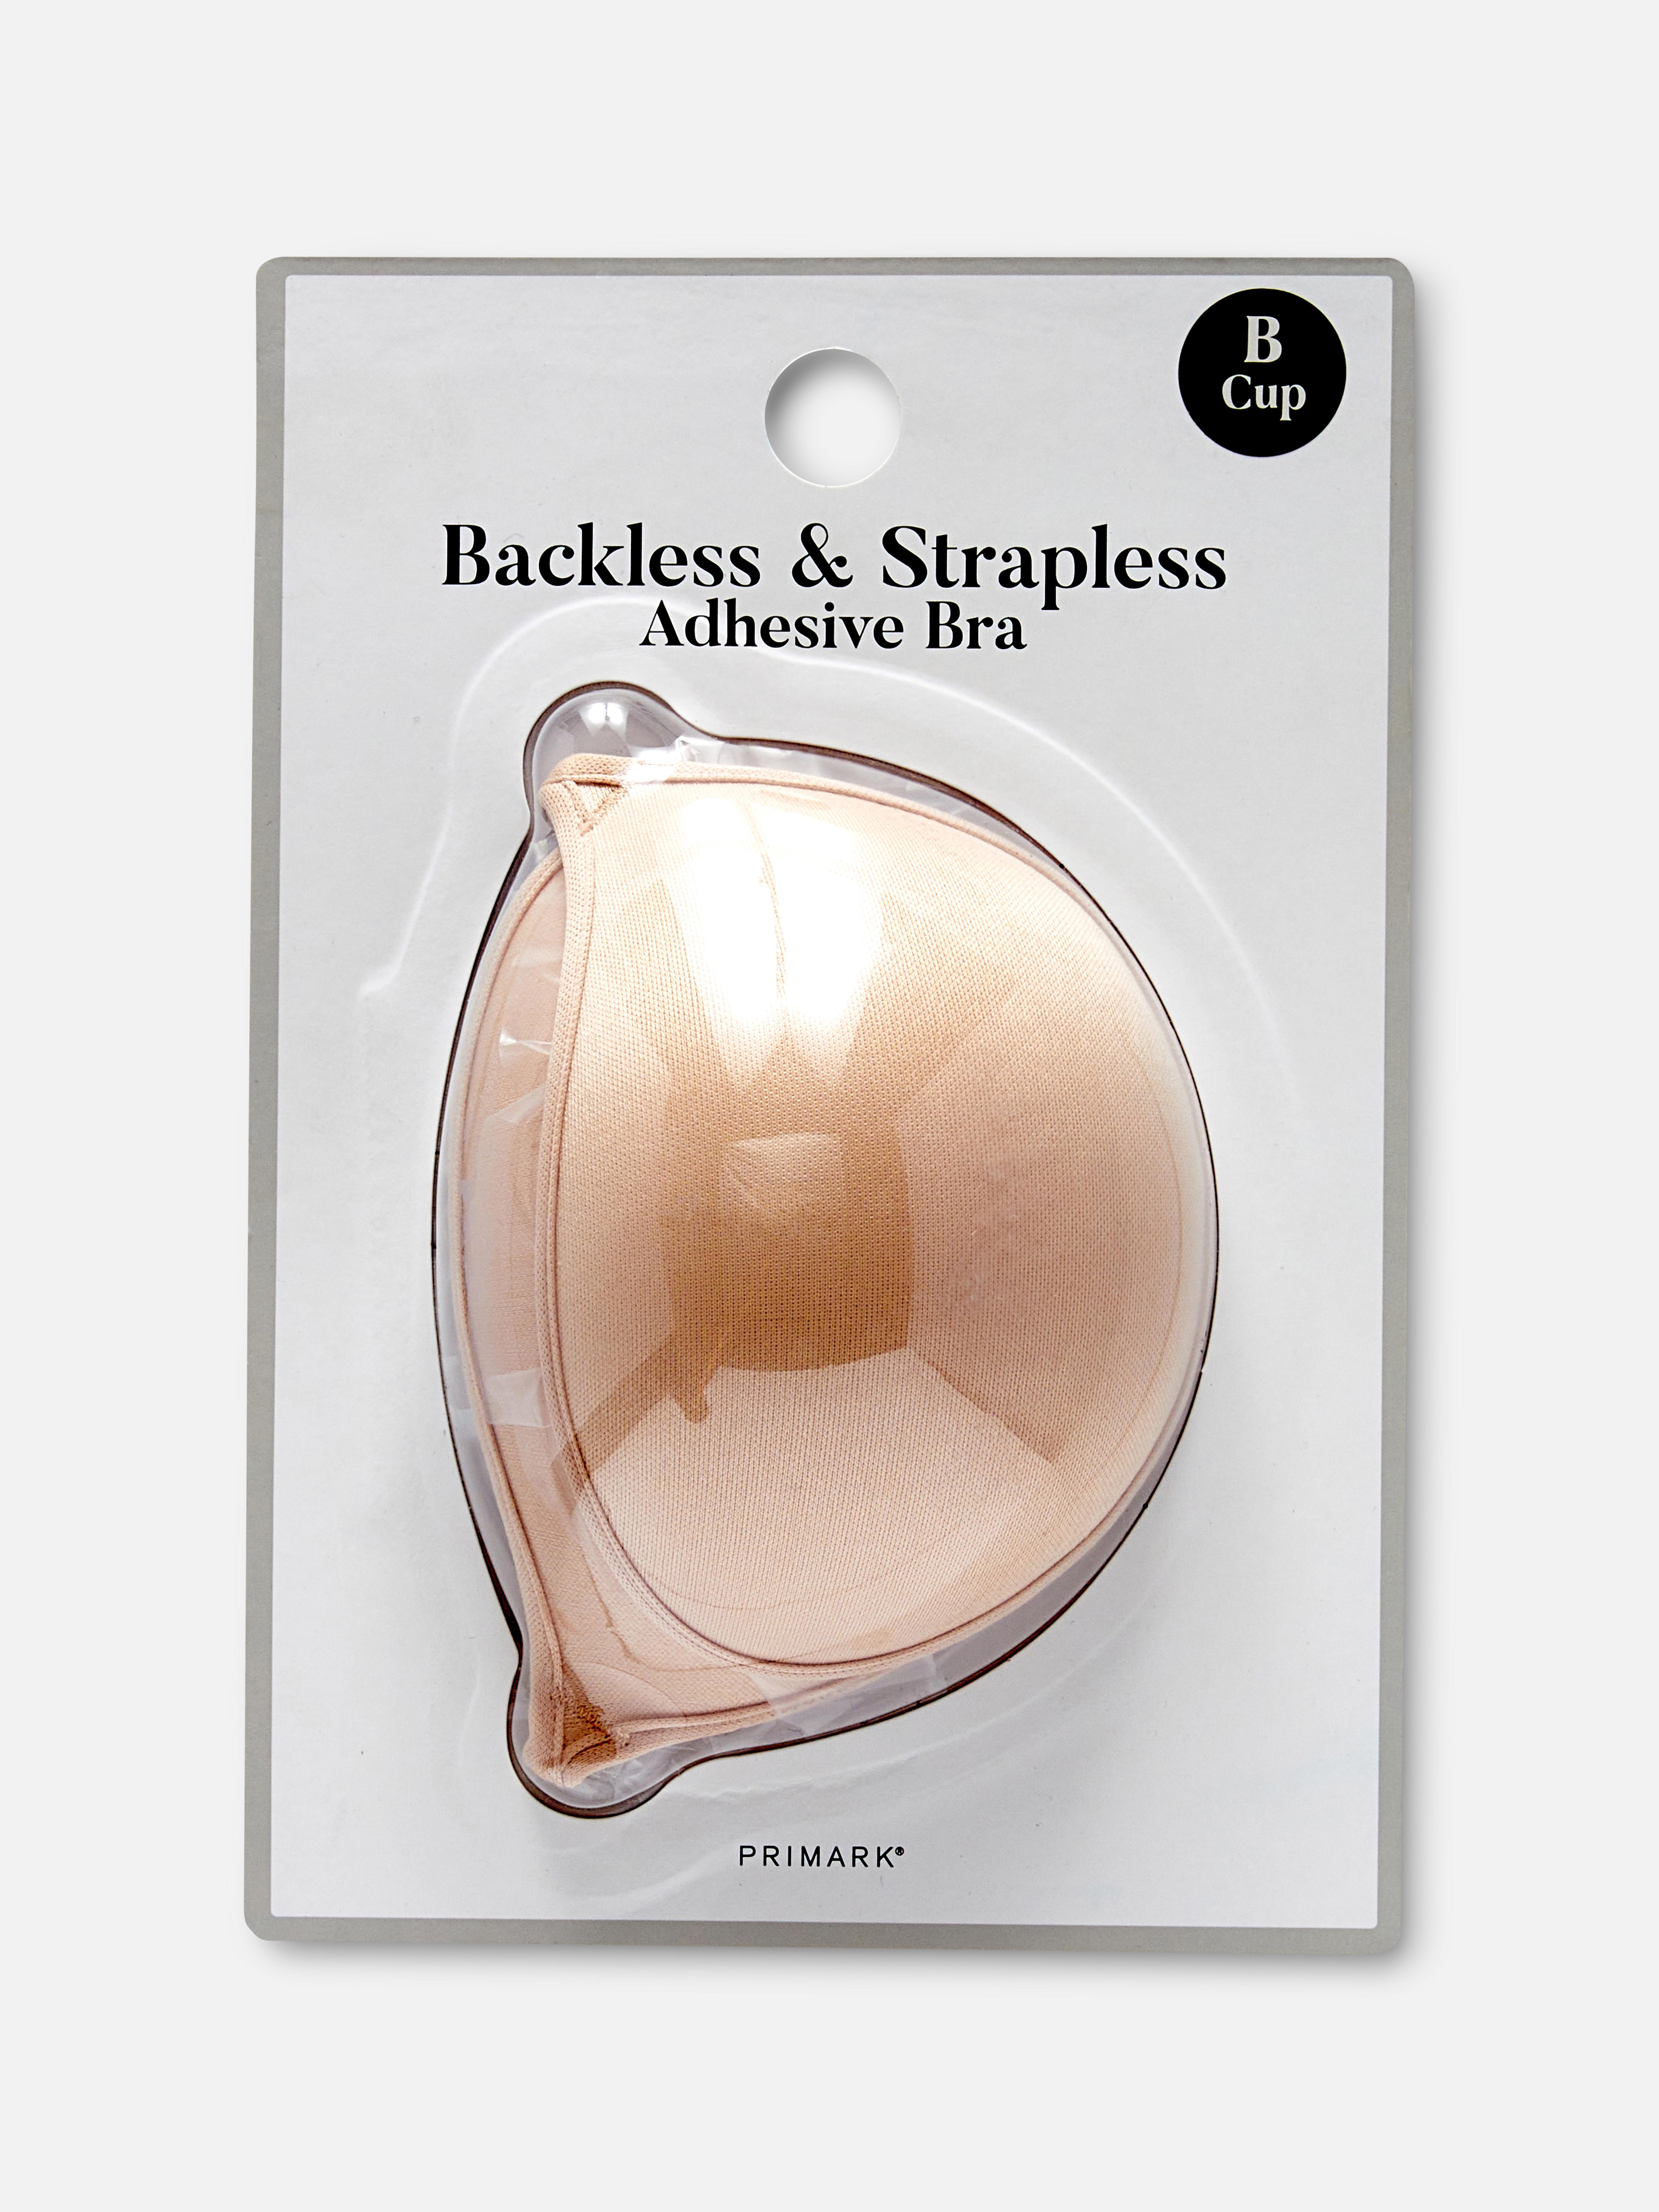 Backless and Strapless Adhesive Bra